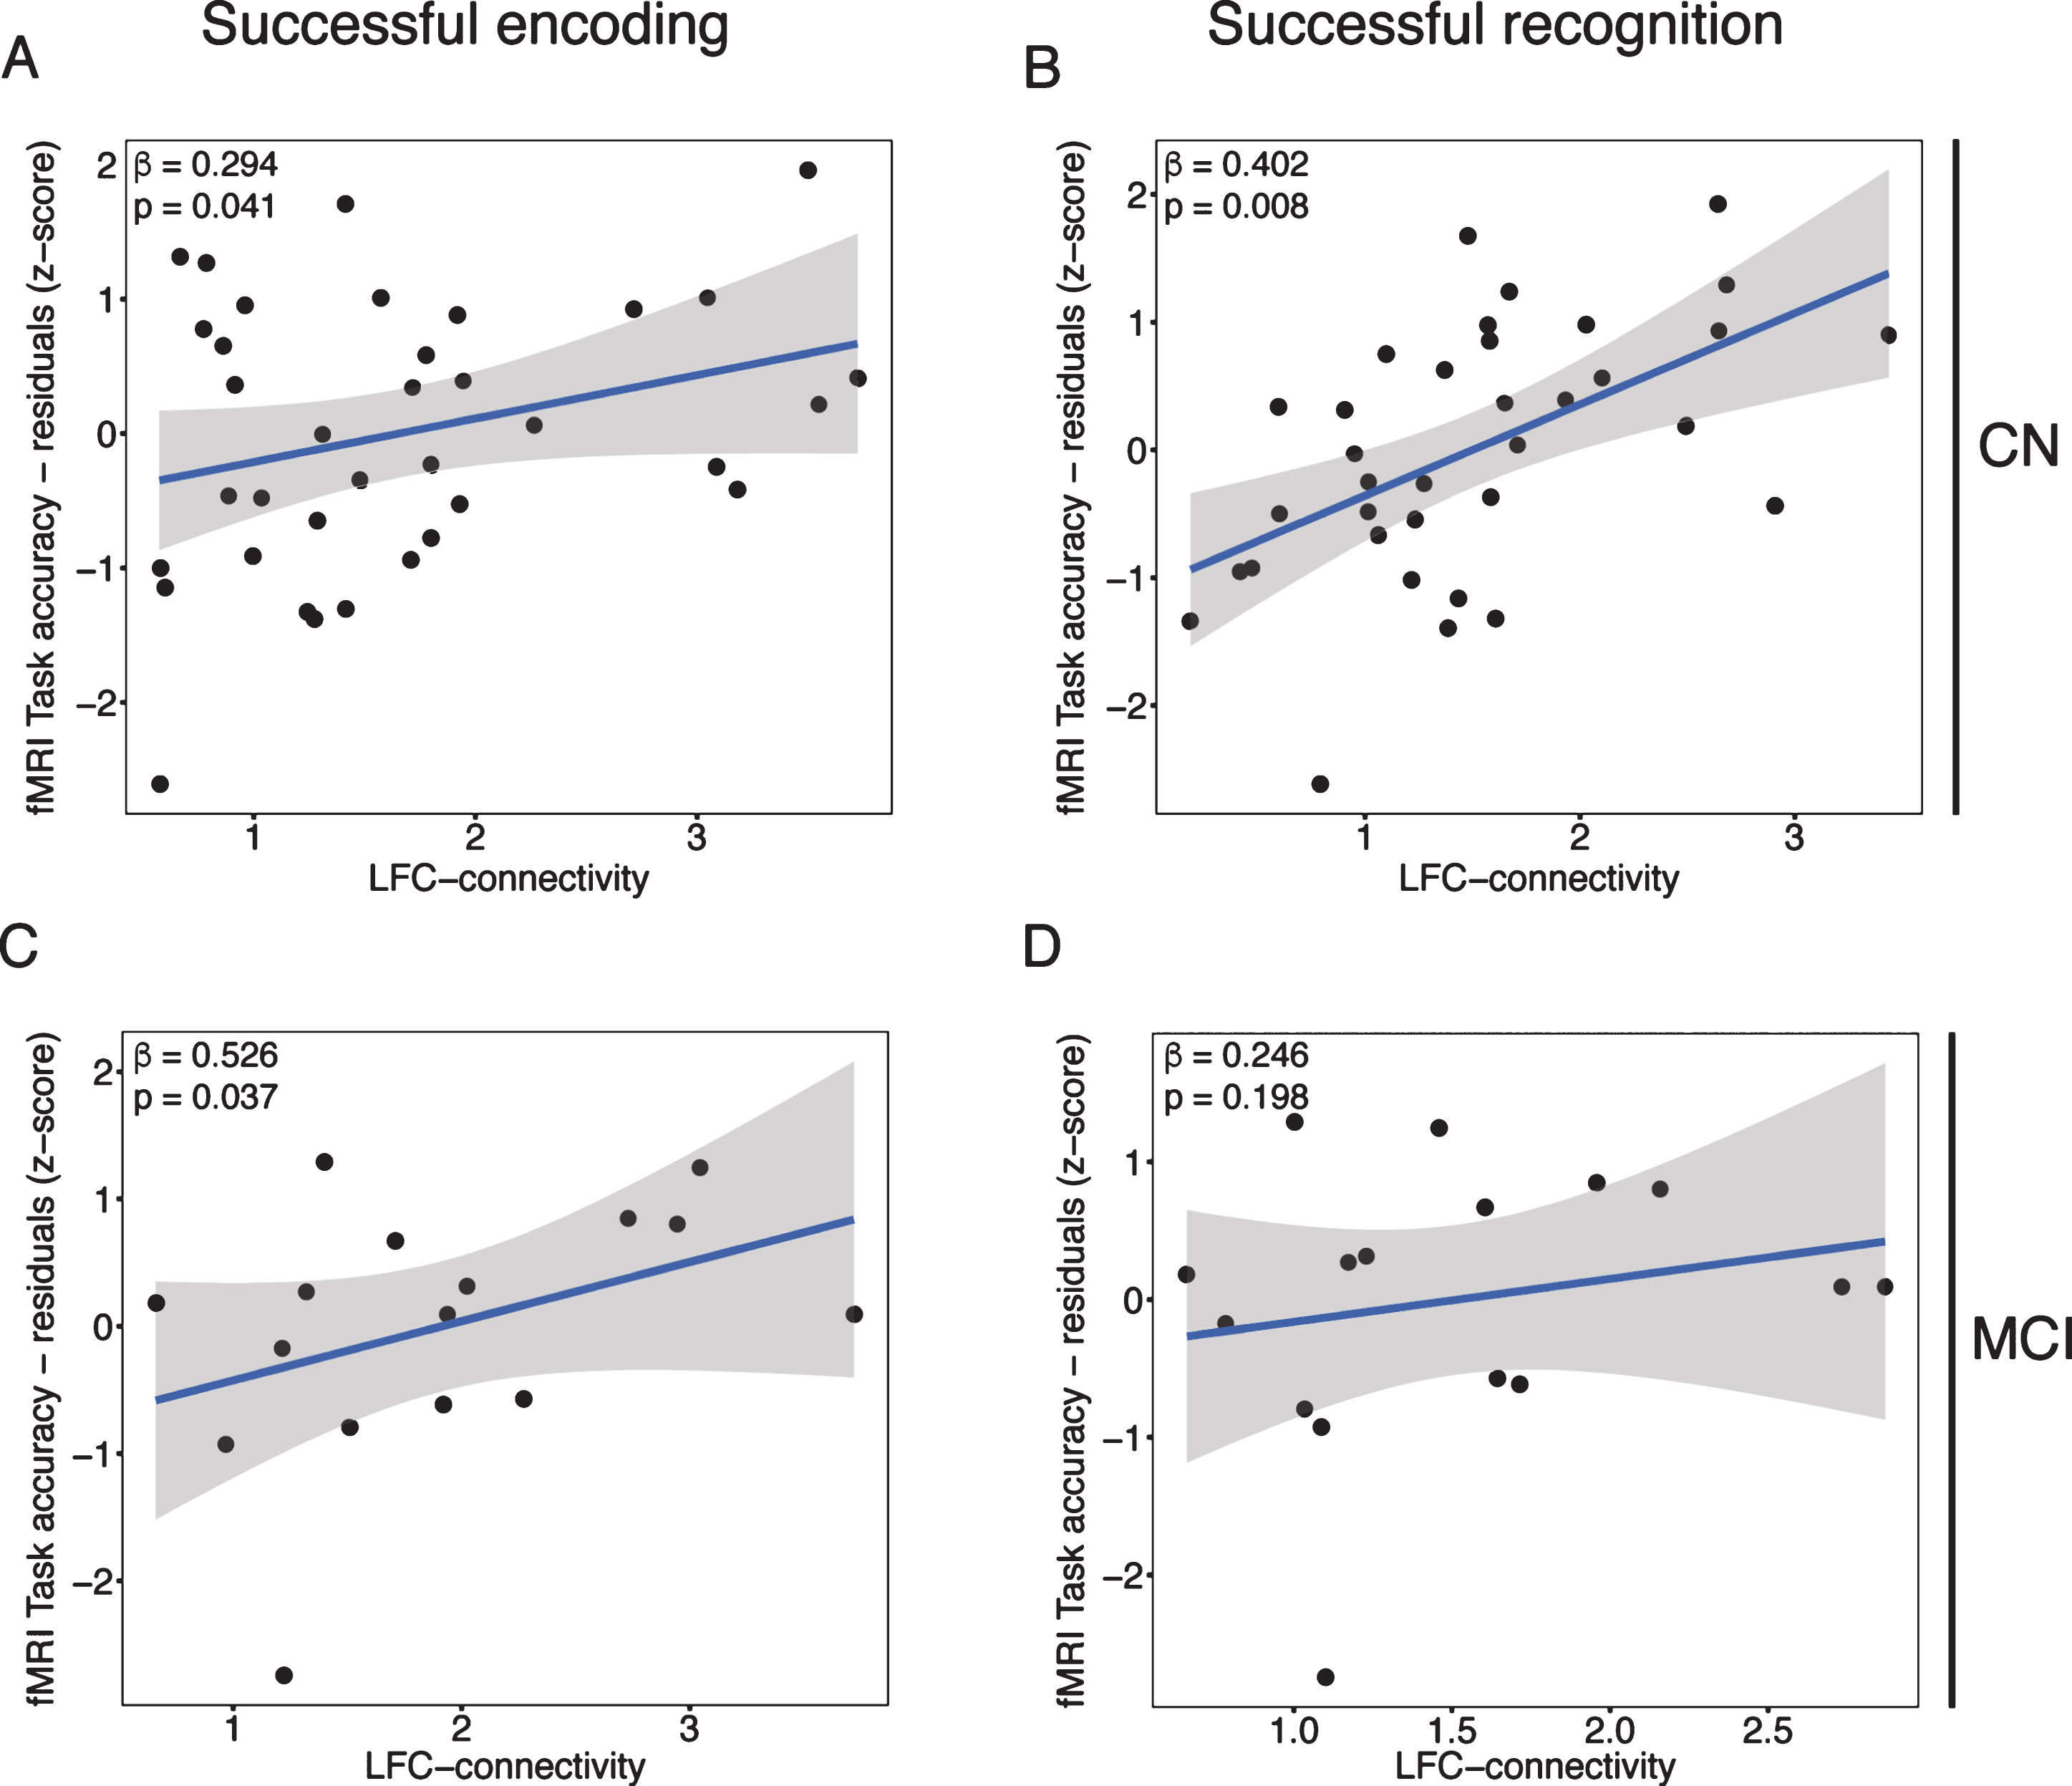 Scatterplots illustrating the association between LFC-connectivity during successful encoding (left panels) or recognition (right panels) on the x-axis and residualized memory performance on the y-axis for CN (upper panels) and MCI (lower panels).